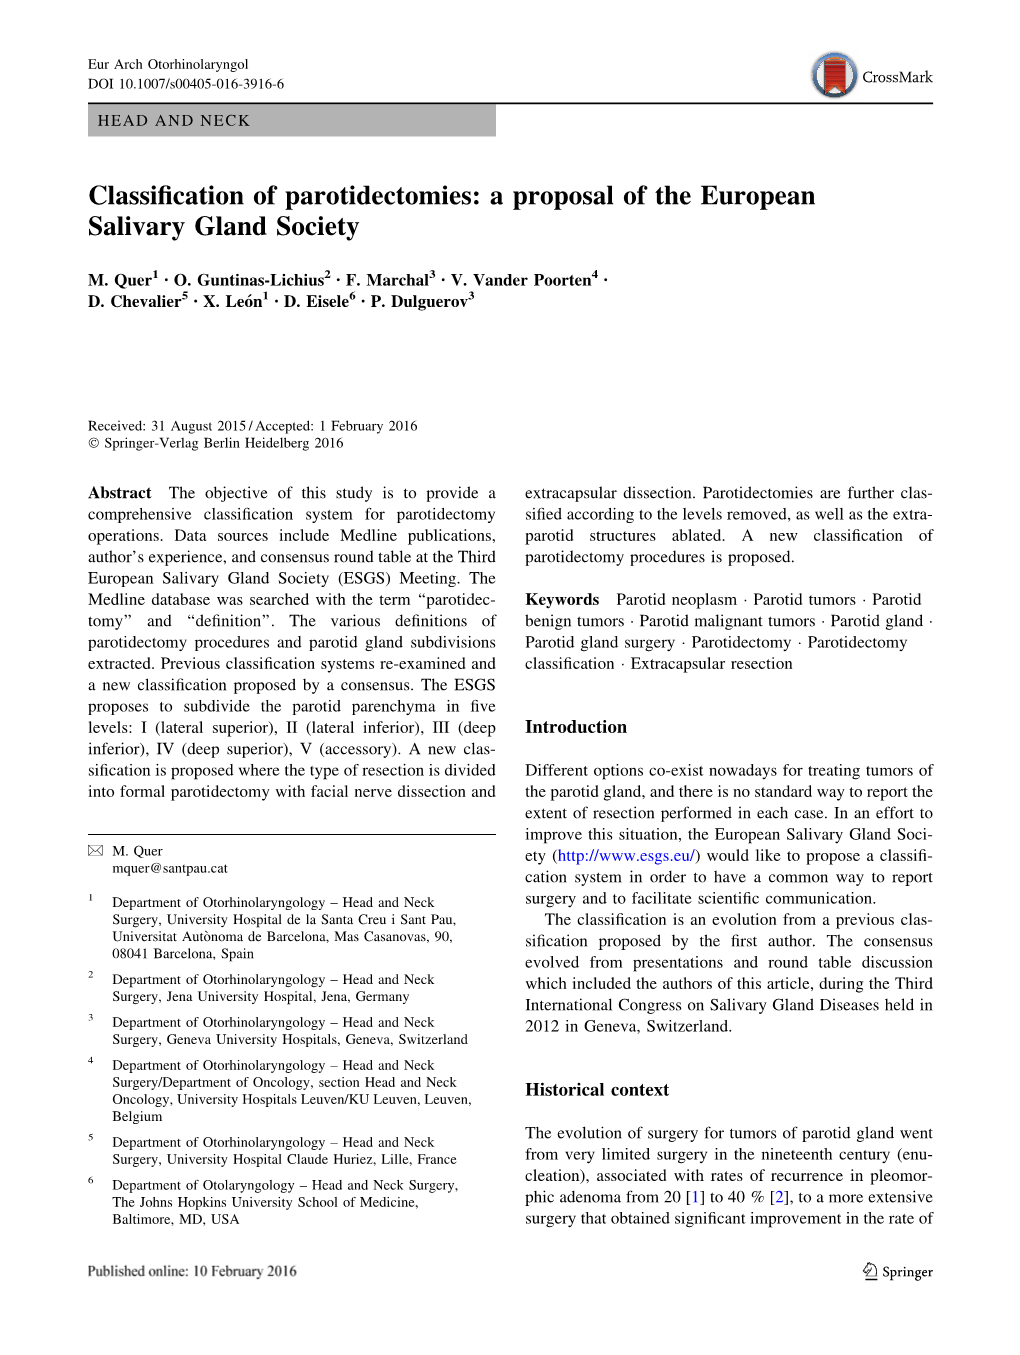 Classification of Parotidectomies: a Proposal of the European Salivary